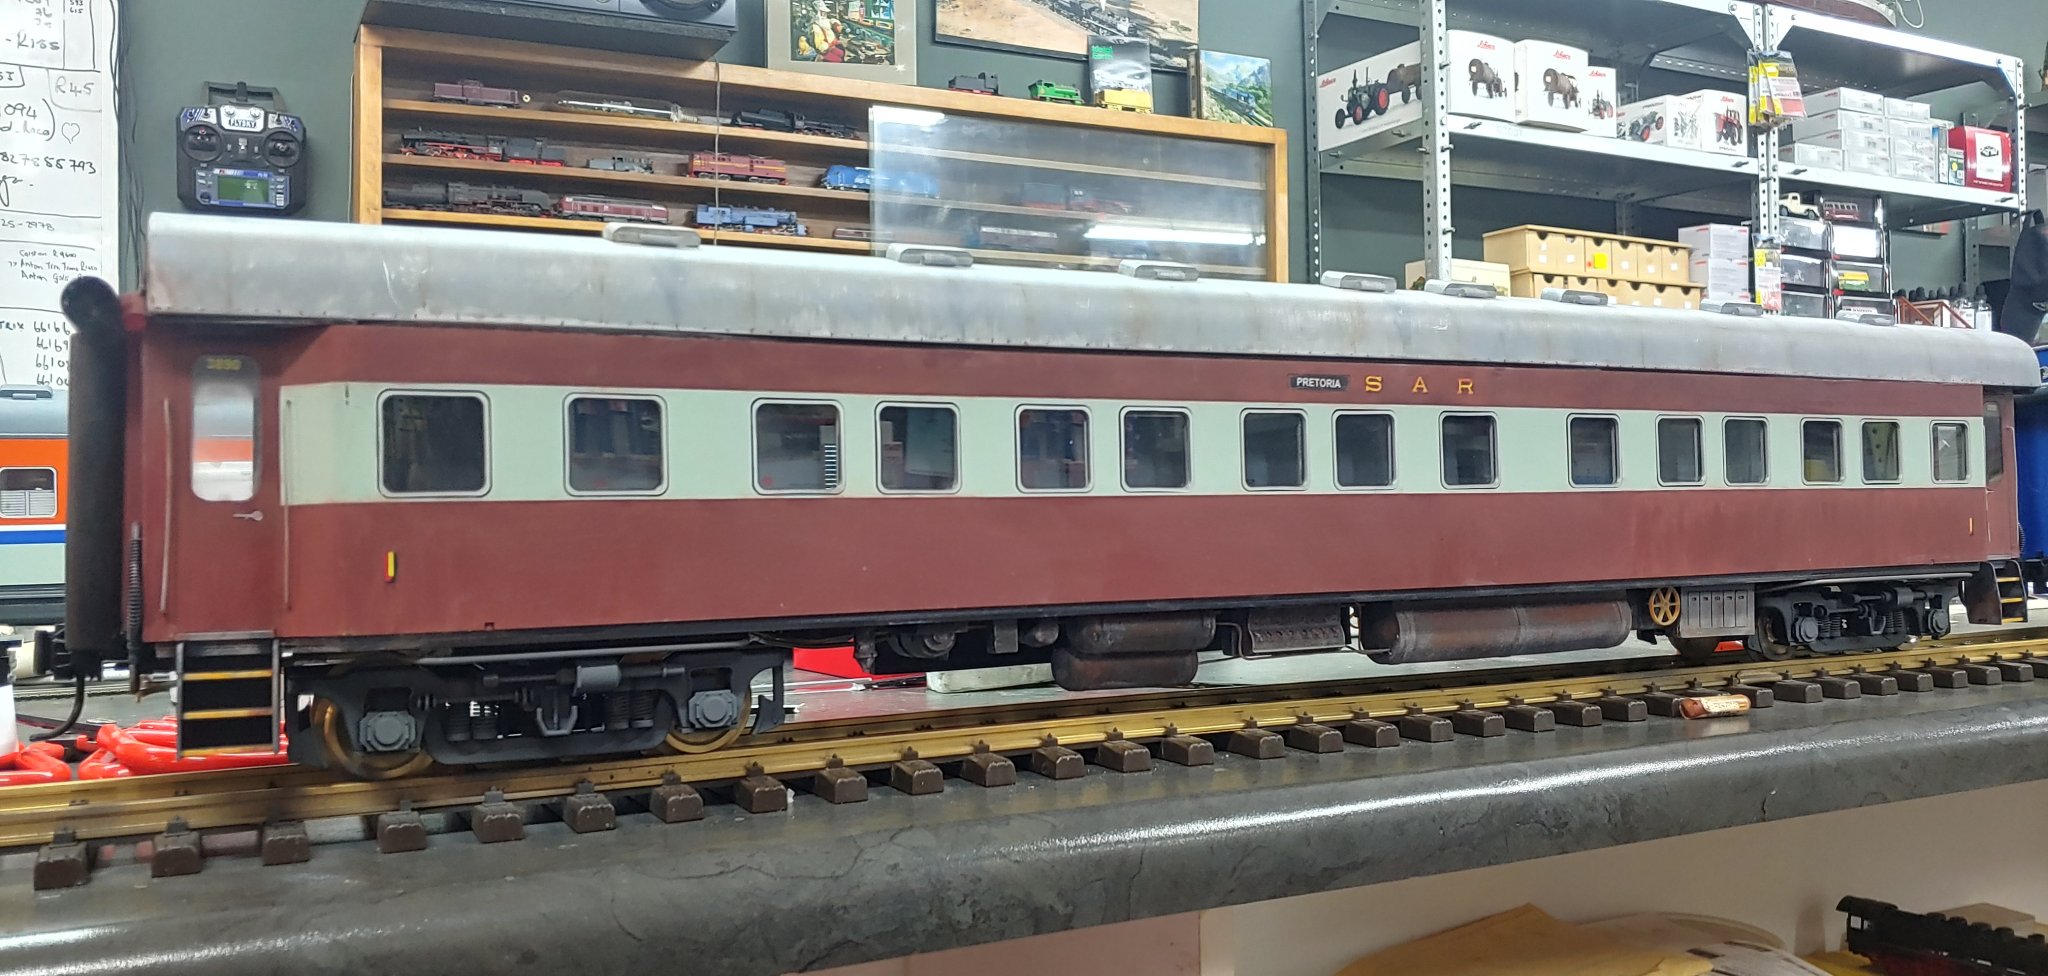 3 THREE G SCALE 45mm GAUGE RAILWAY TRAIN COACH BODY CONVERT HOUSE STORE STABLE 